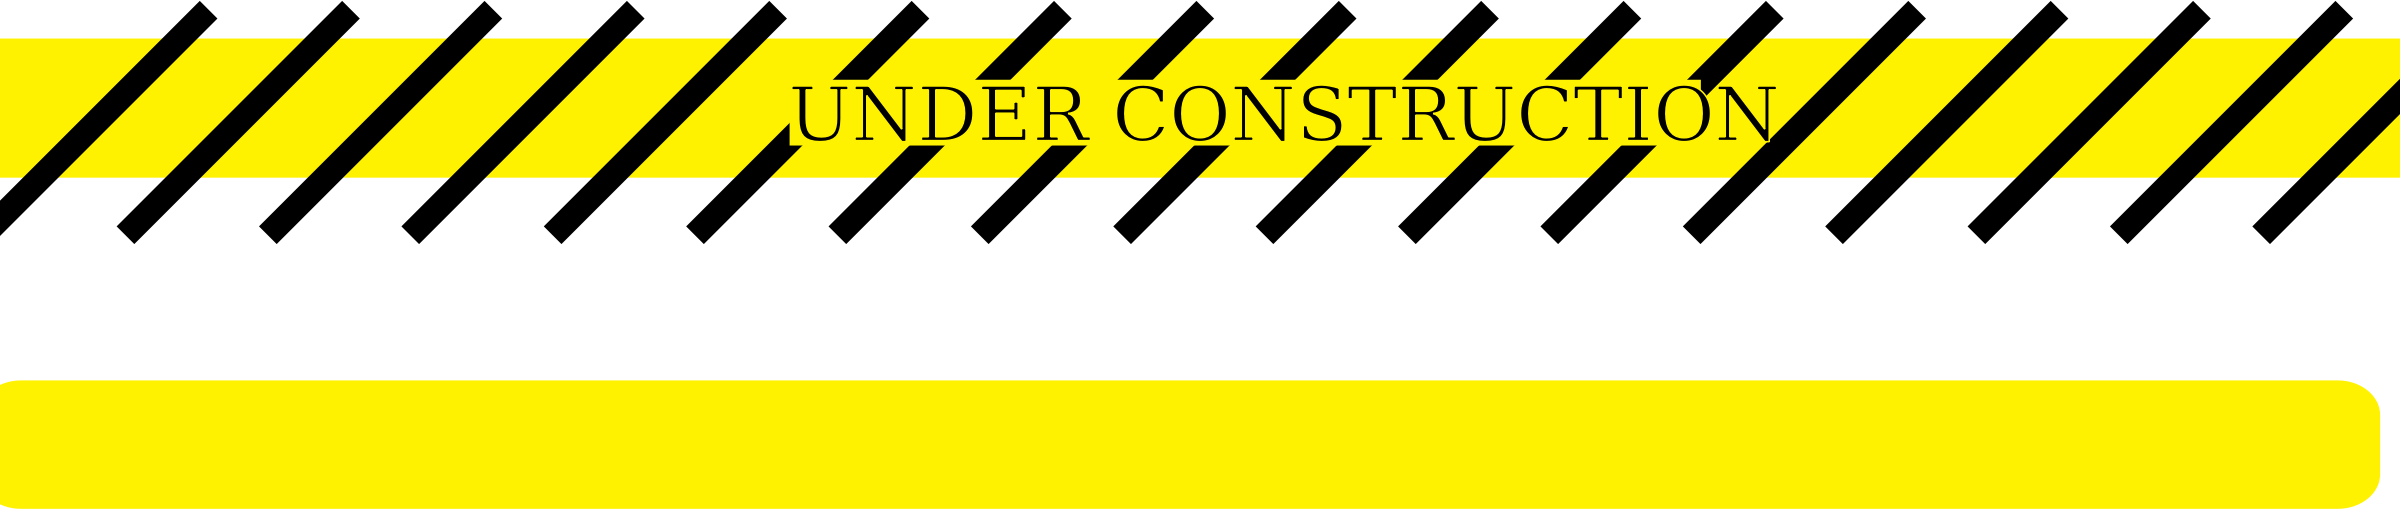 under construction clipart free download - photo #36